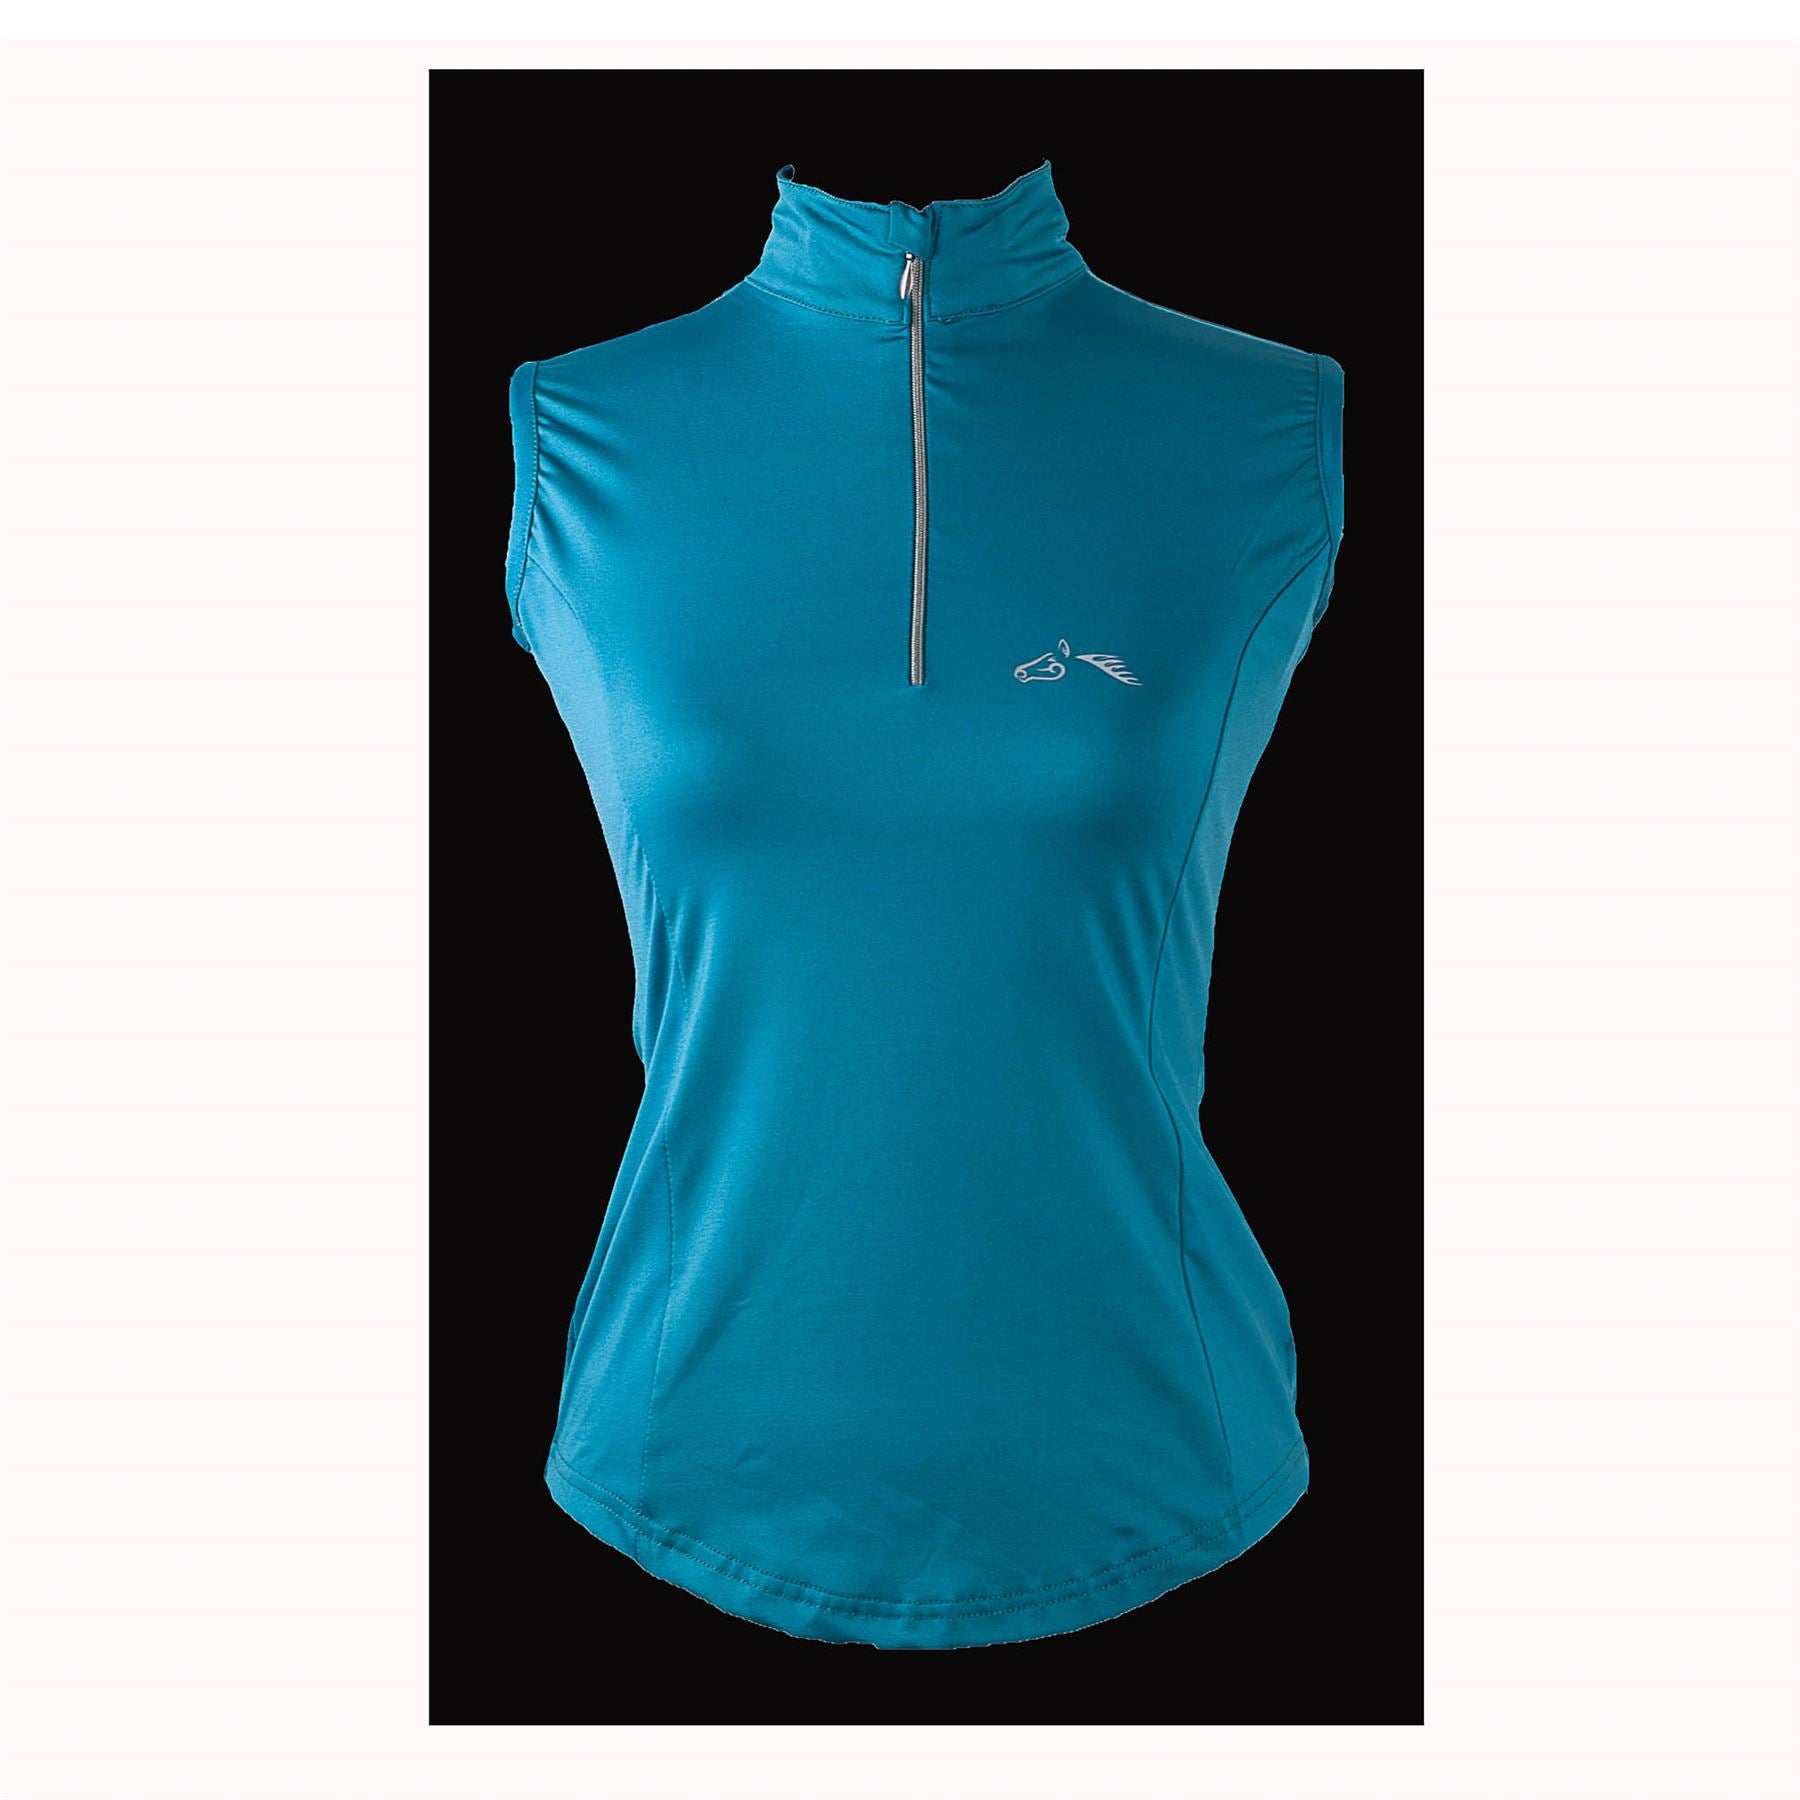 Gallop Equestrian Sleeveless Zipped Neck Base Layer - Just Horse Riders